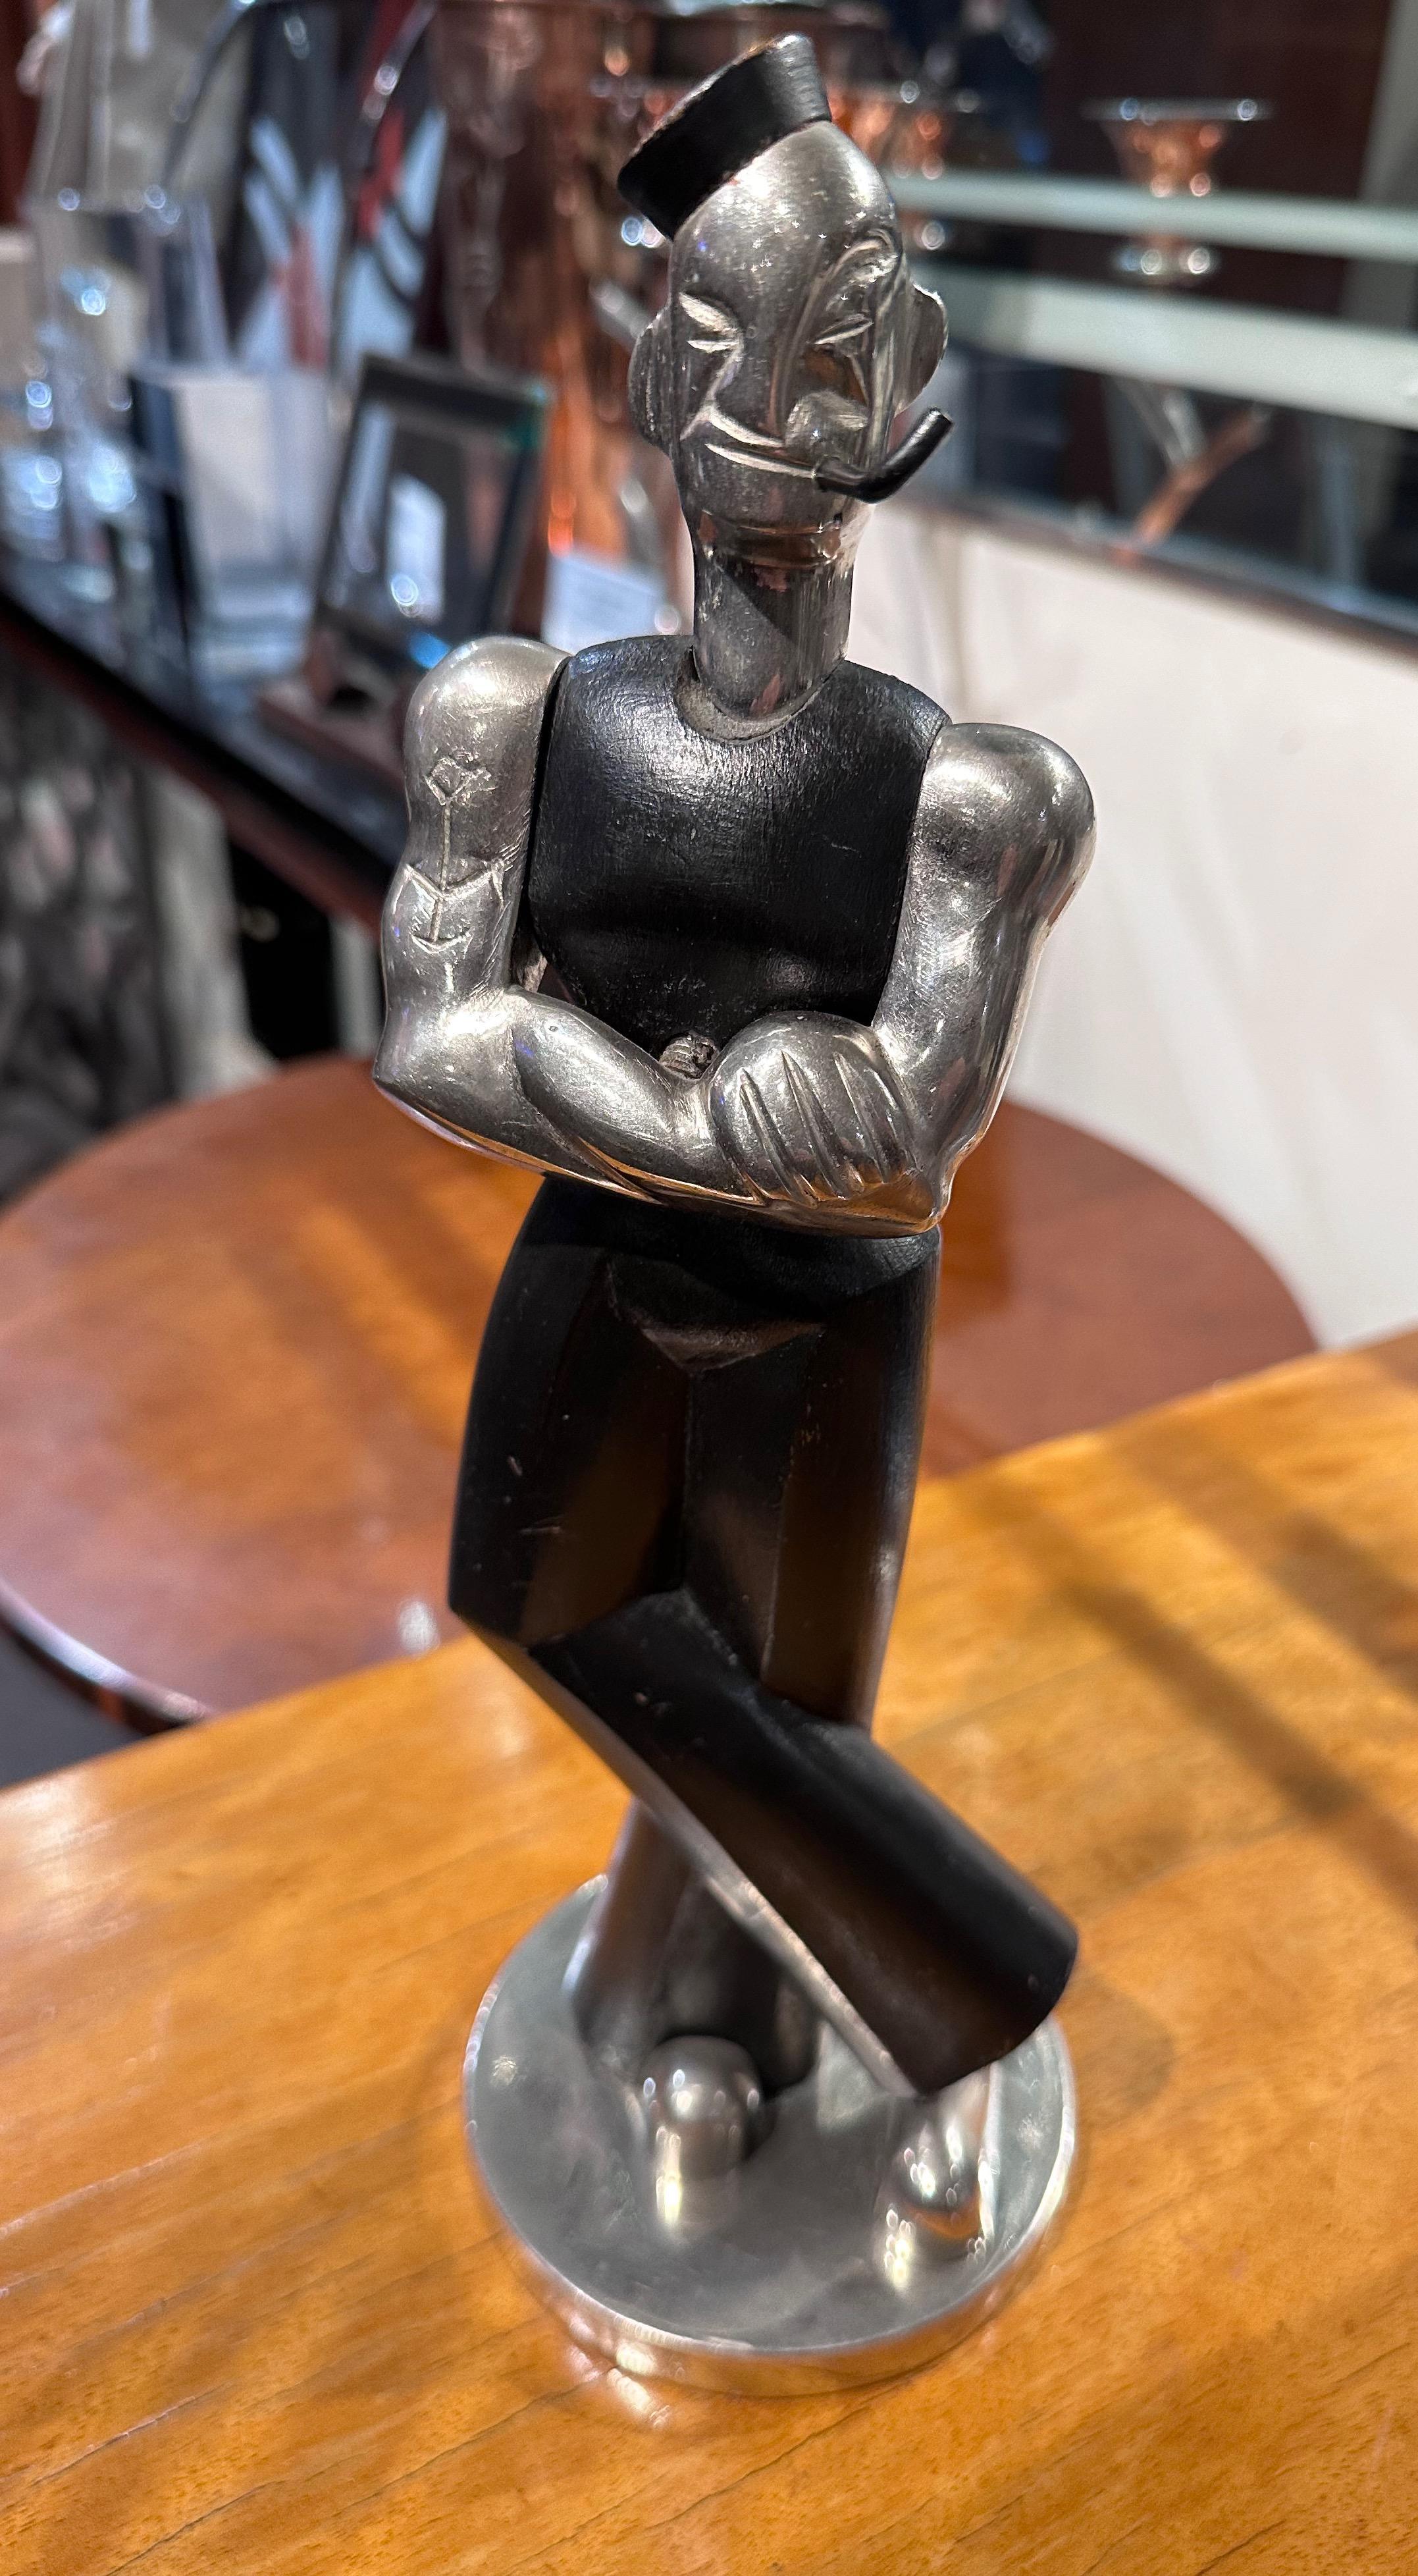 Popeye the Sailor is a European sculpture in the Hagenauer style made of Ebony wood and metal in the Art Deco style. We have had a few pieces in this treatment, including style and materials. They are scarce to find. This one is exciting since it is